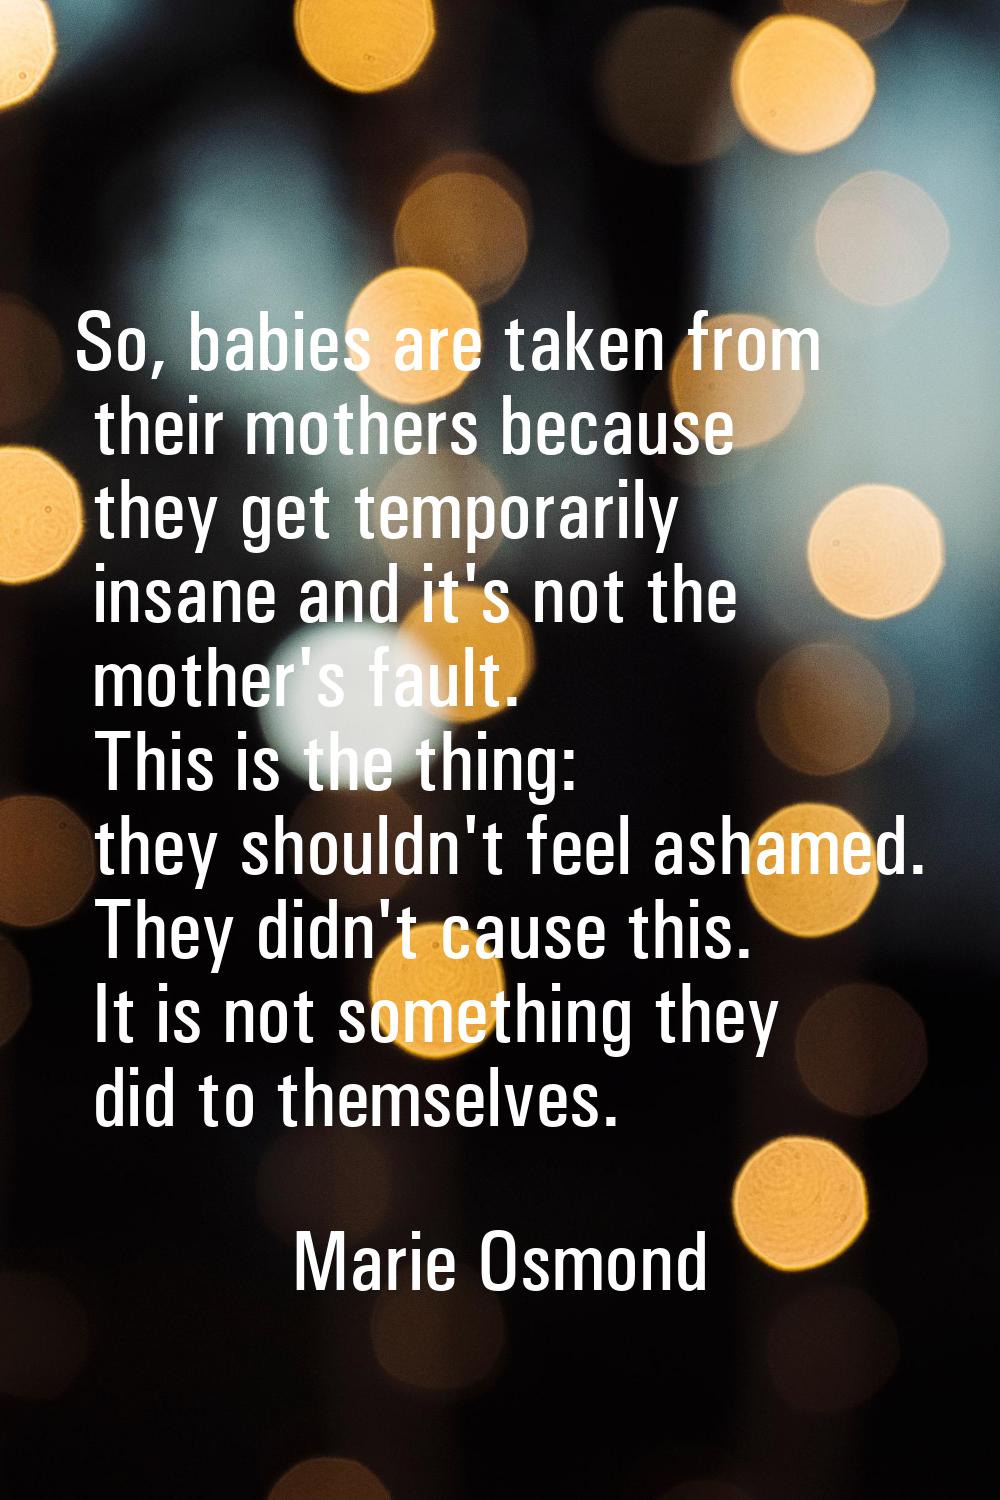 So, babies are taken from their mothers because they get temporarily insane and it's not the mother